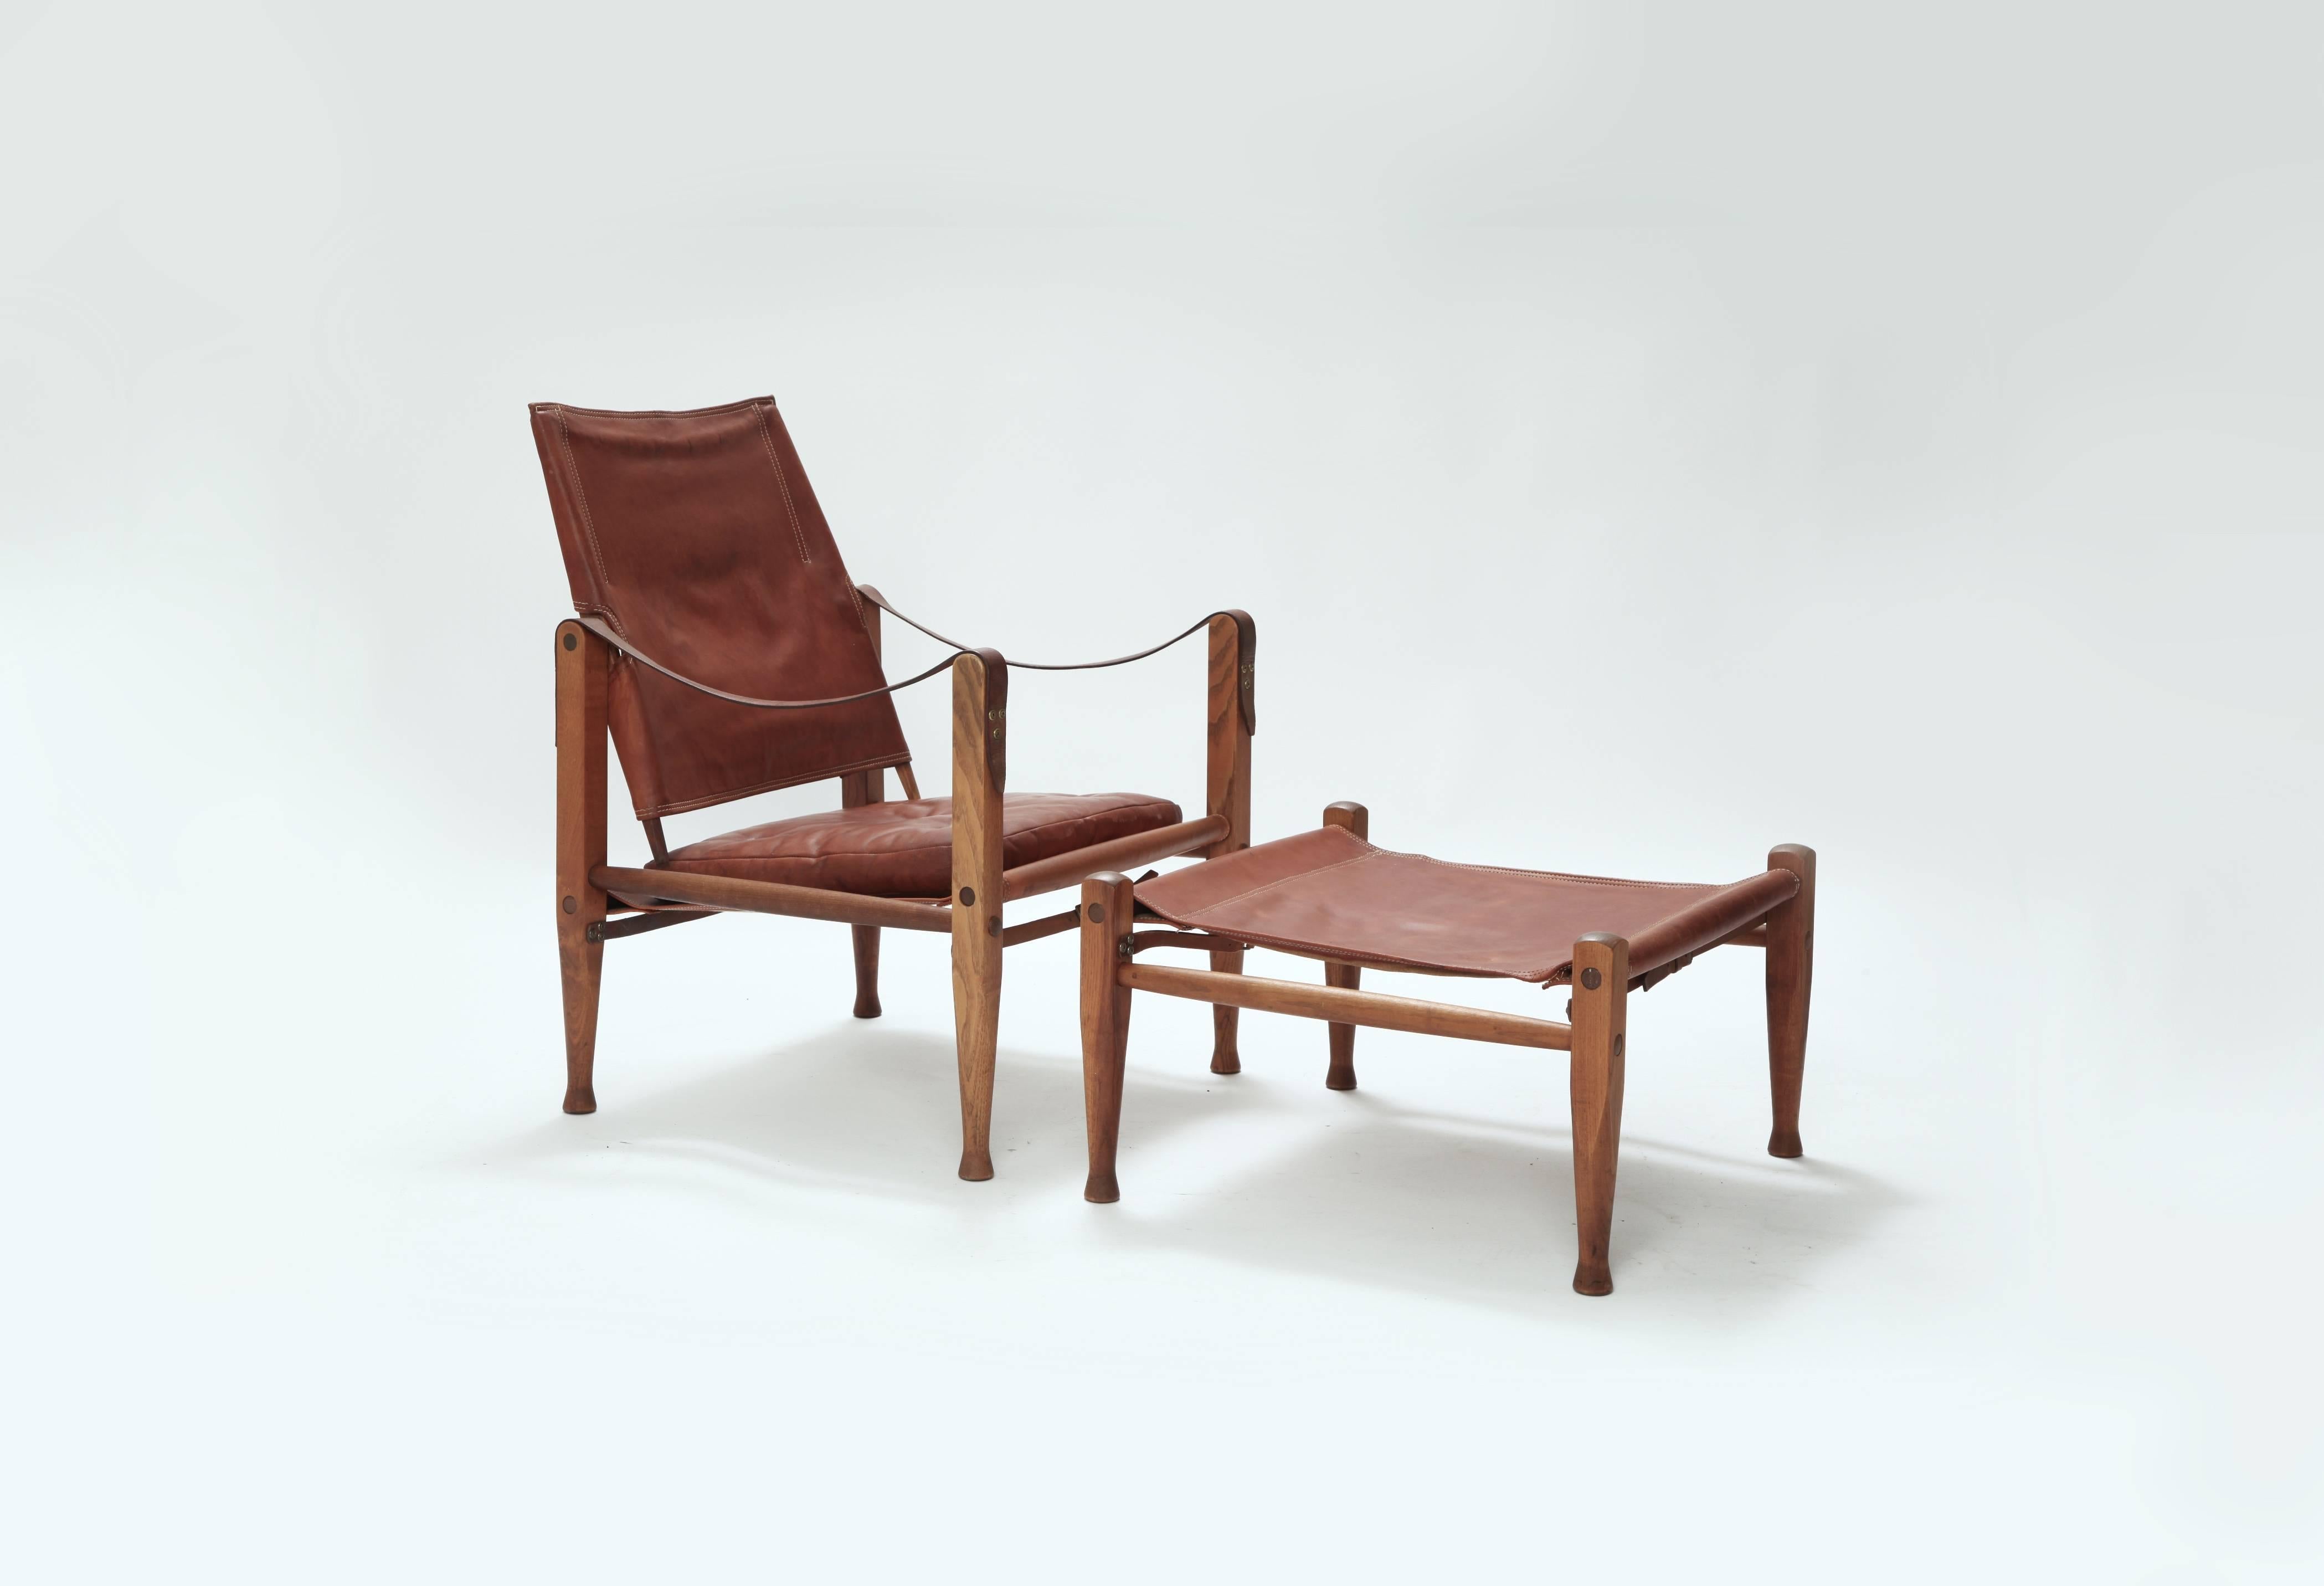 A rare safari chair and matching foot stool designed by Kaare Klint. Ashwood frame and beautifully patinated original leather seat and back. Designed in the 1933 by Kaare Klint for Rud. Rasmussen. Good condition.   
* complimentary US shipping